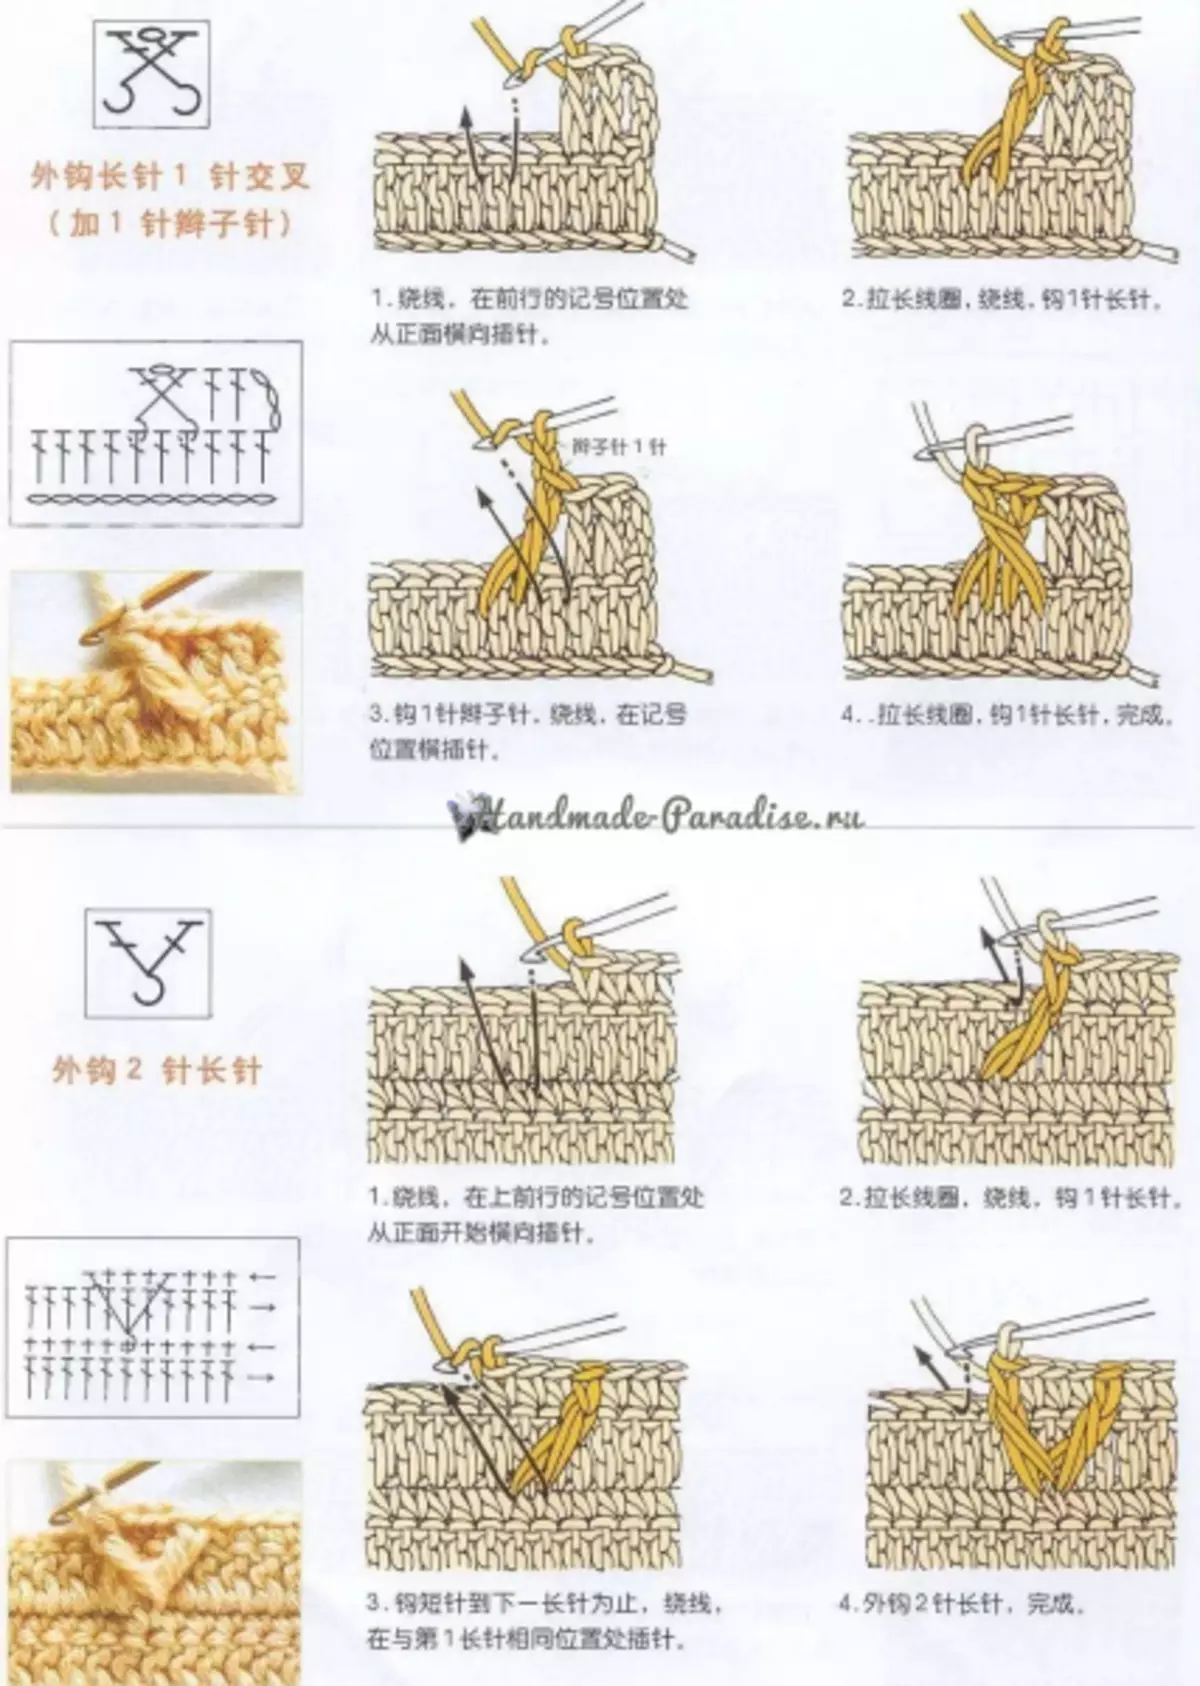 How to crochet in chinese schemes